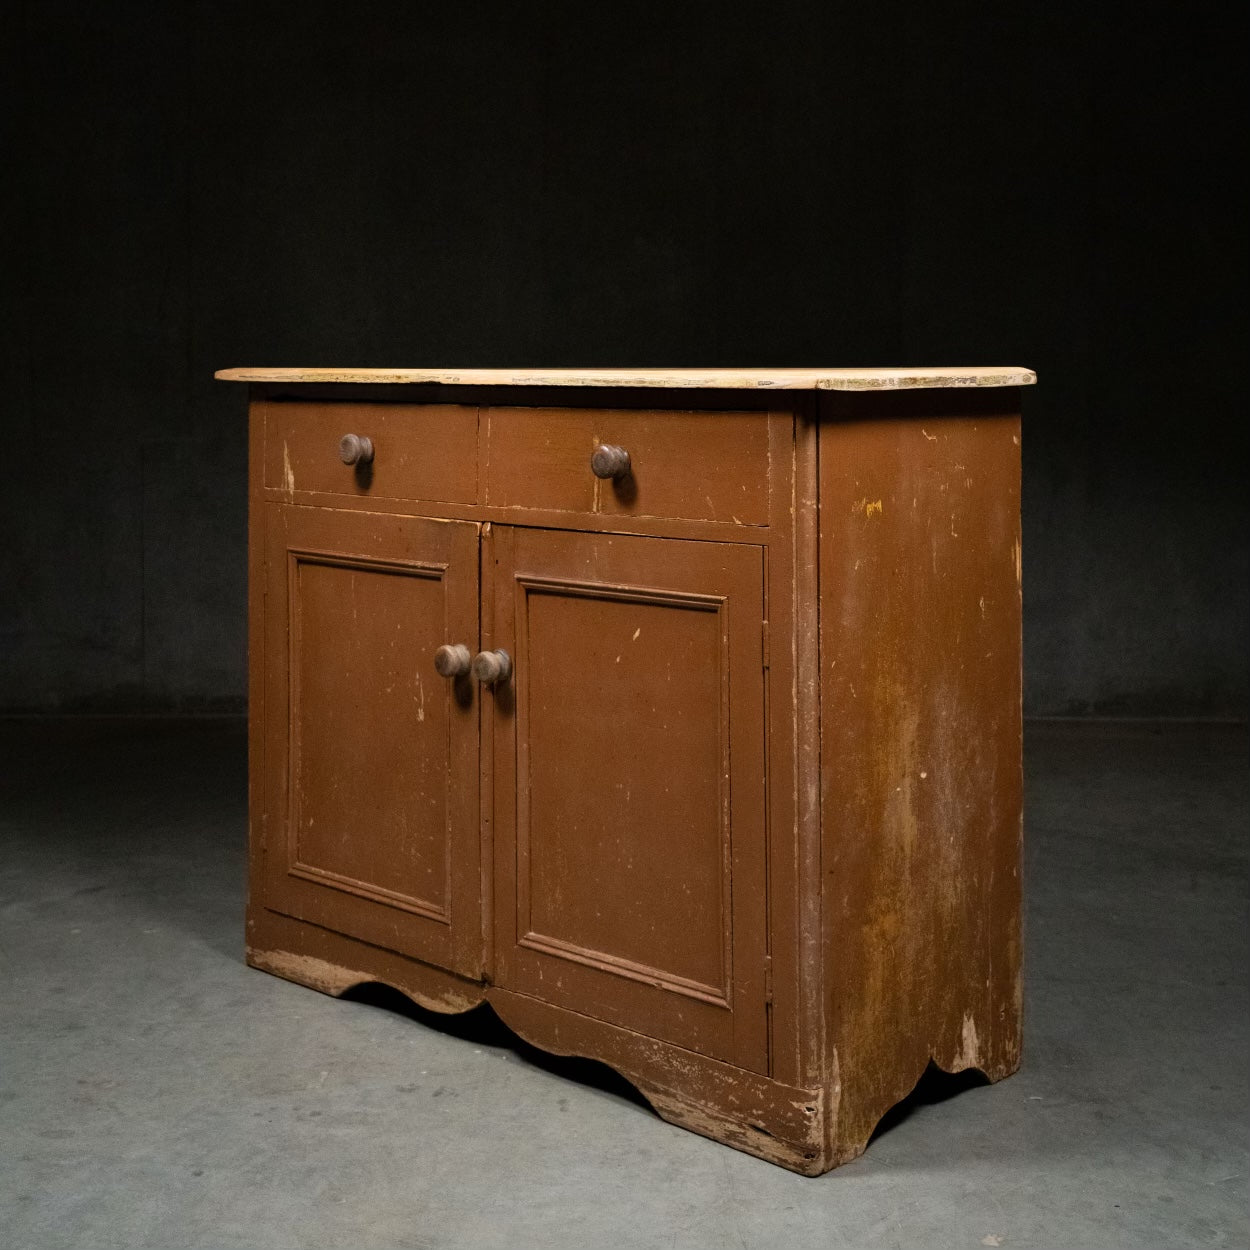 1870 Canadiana Pine Country Sideboard